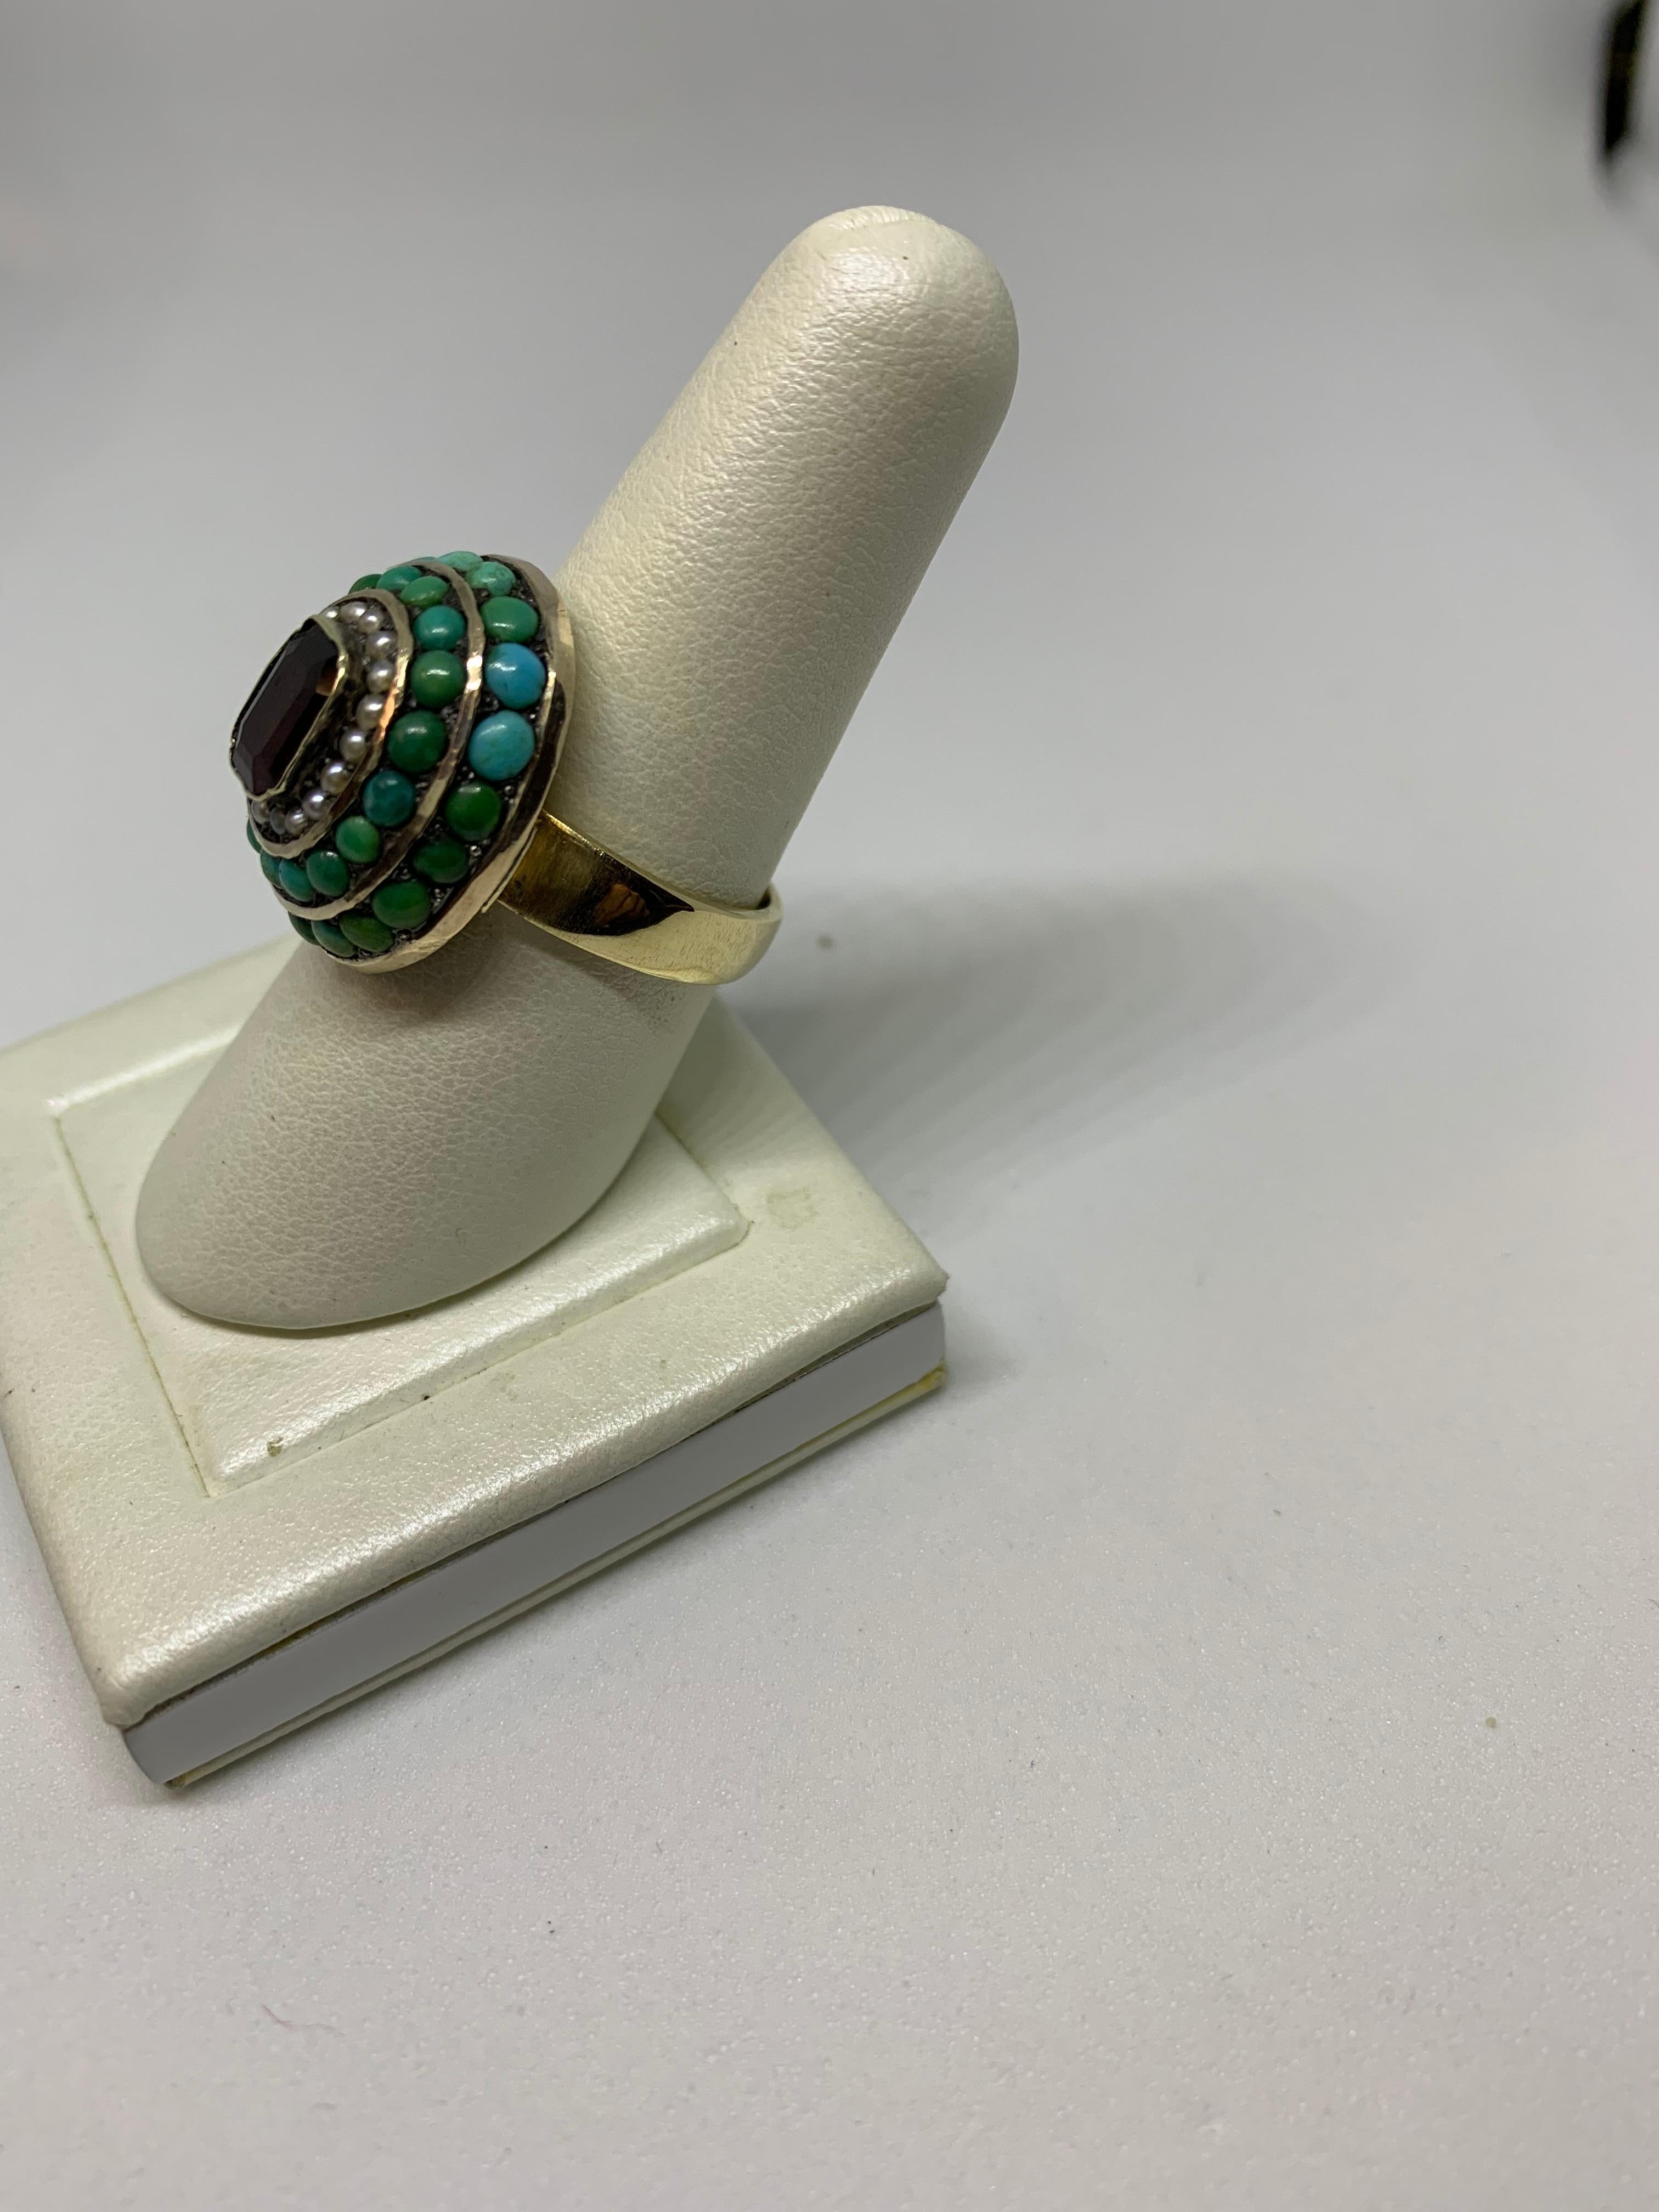 This one-of-a-kind estate ring boasts of a 